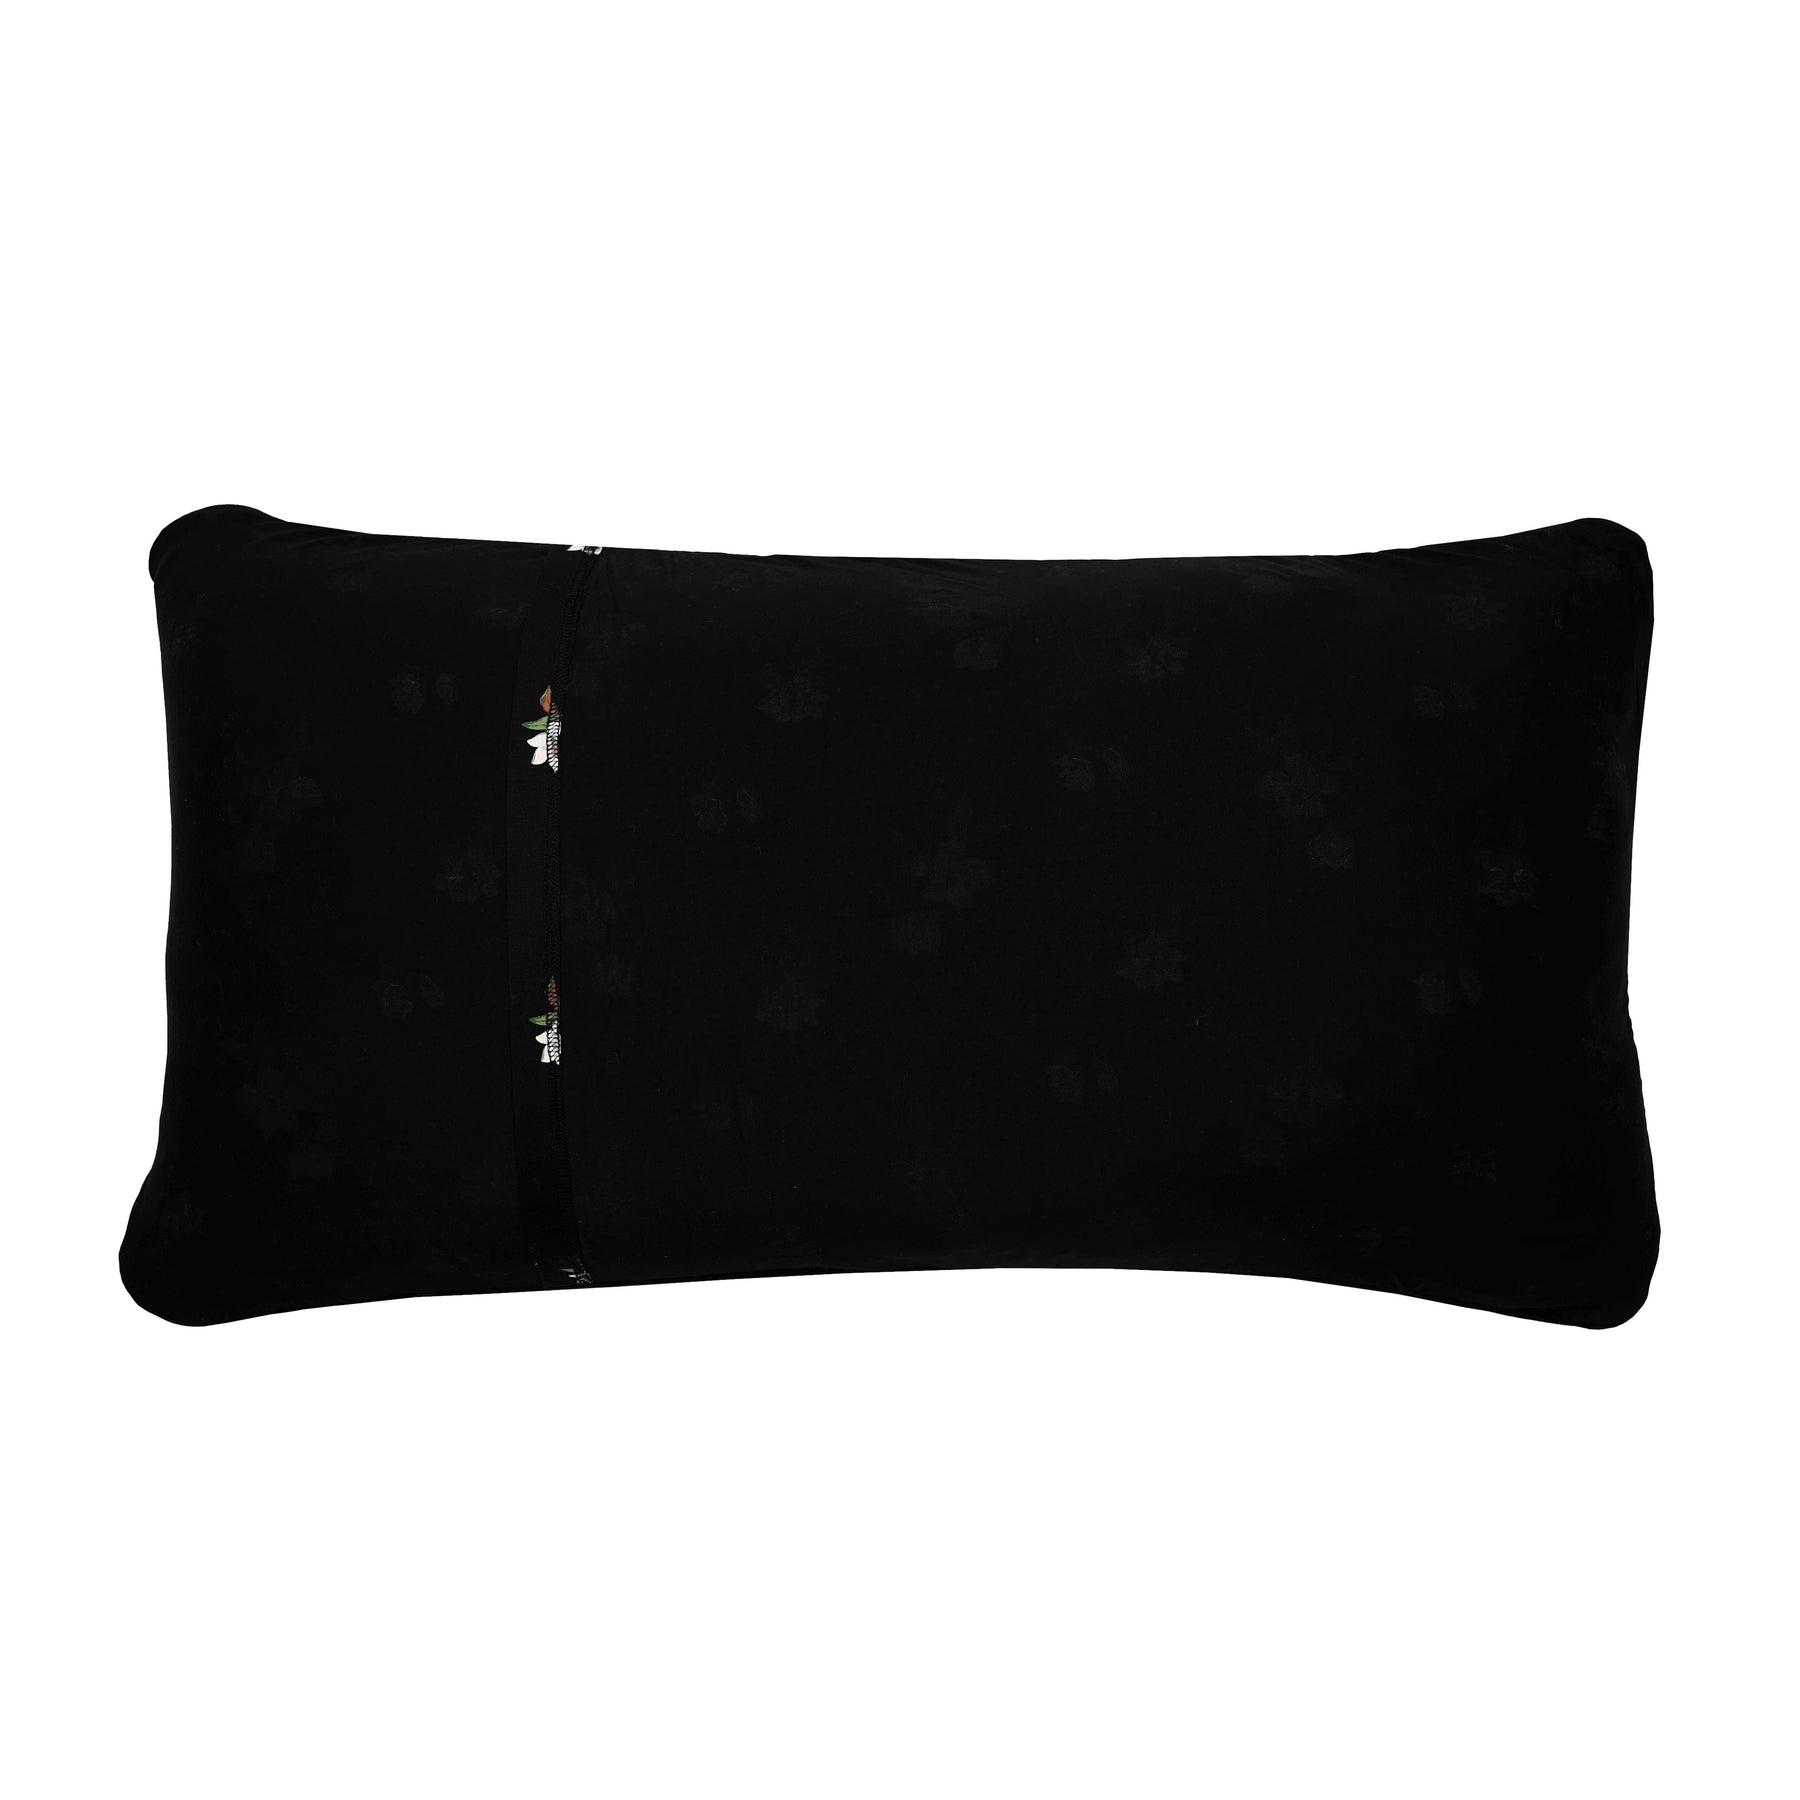 Kyte Baby King Pillow Case Big Midnight Magnolia / King King Pillowcase in Big Midnight Magnolia